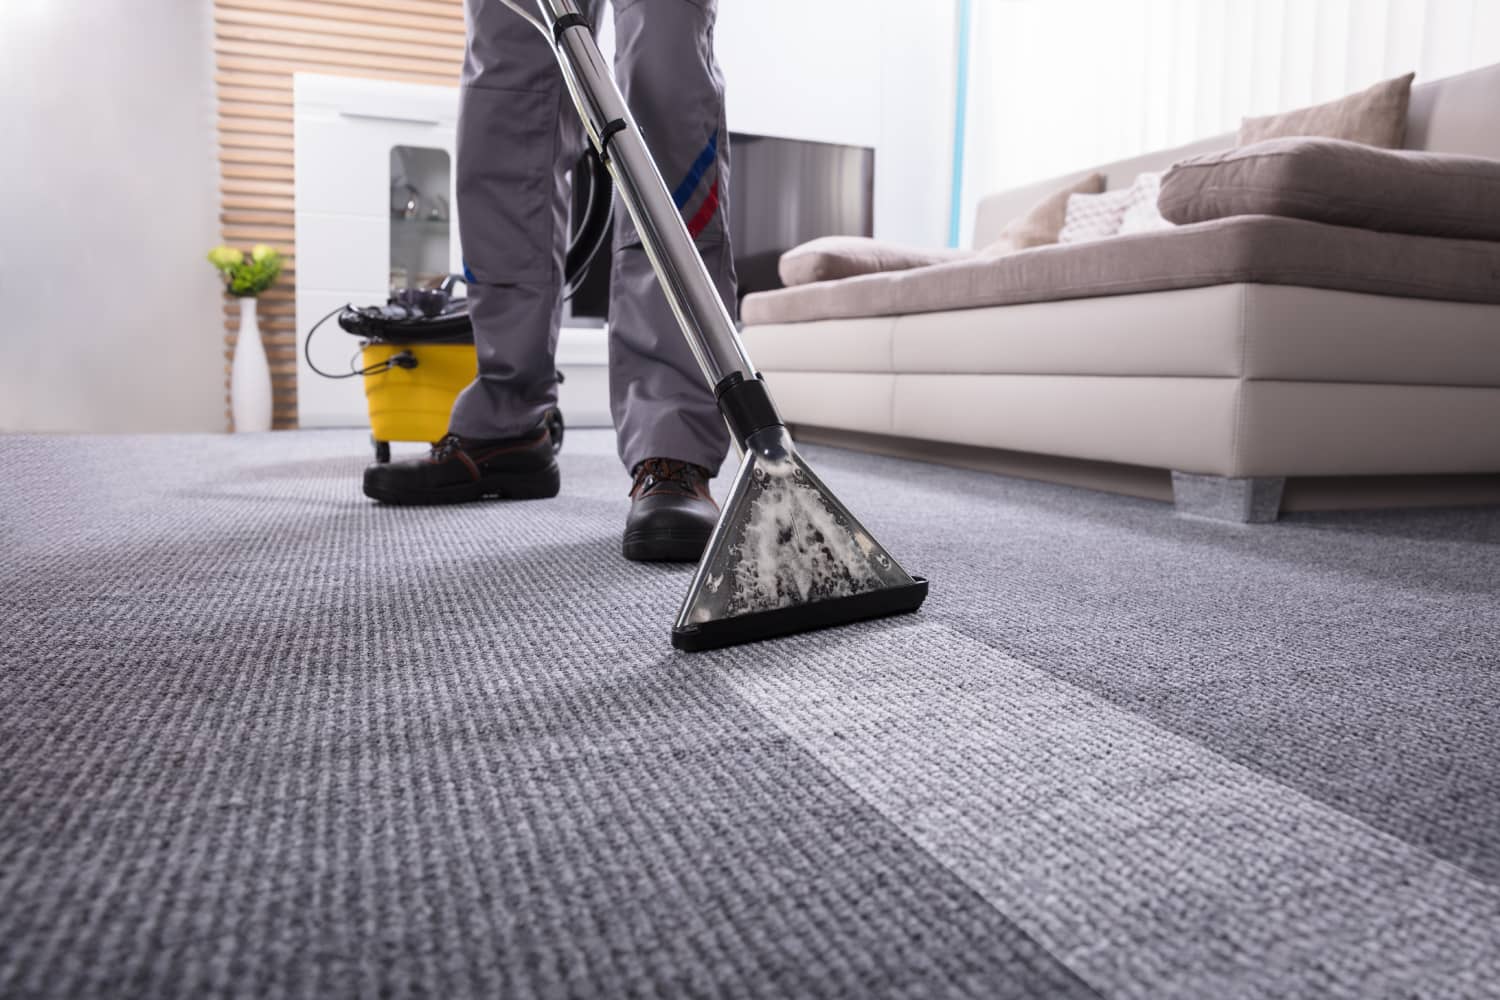 Premium Carpet Cleaning with Eco Dry Floor Care: Your Local Low Moisture Carpet Cleaning Experts